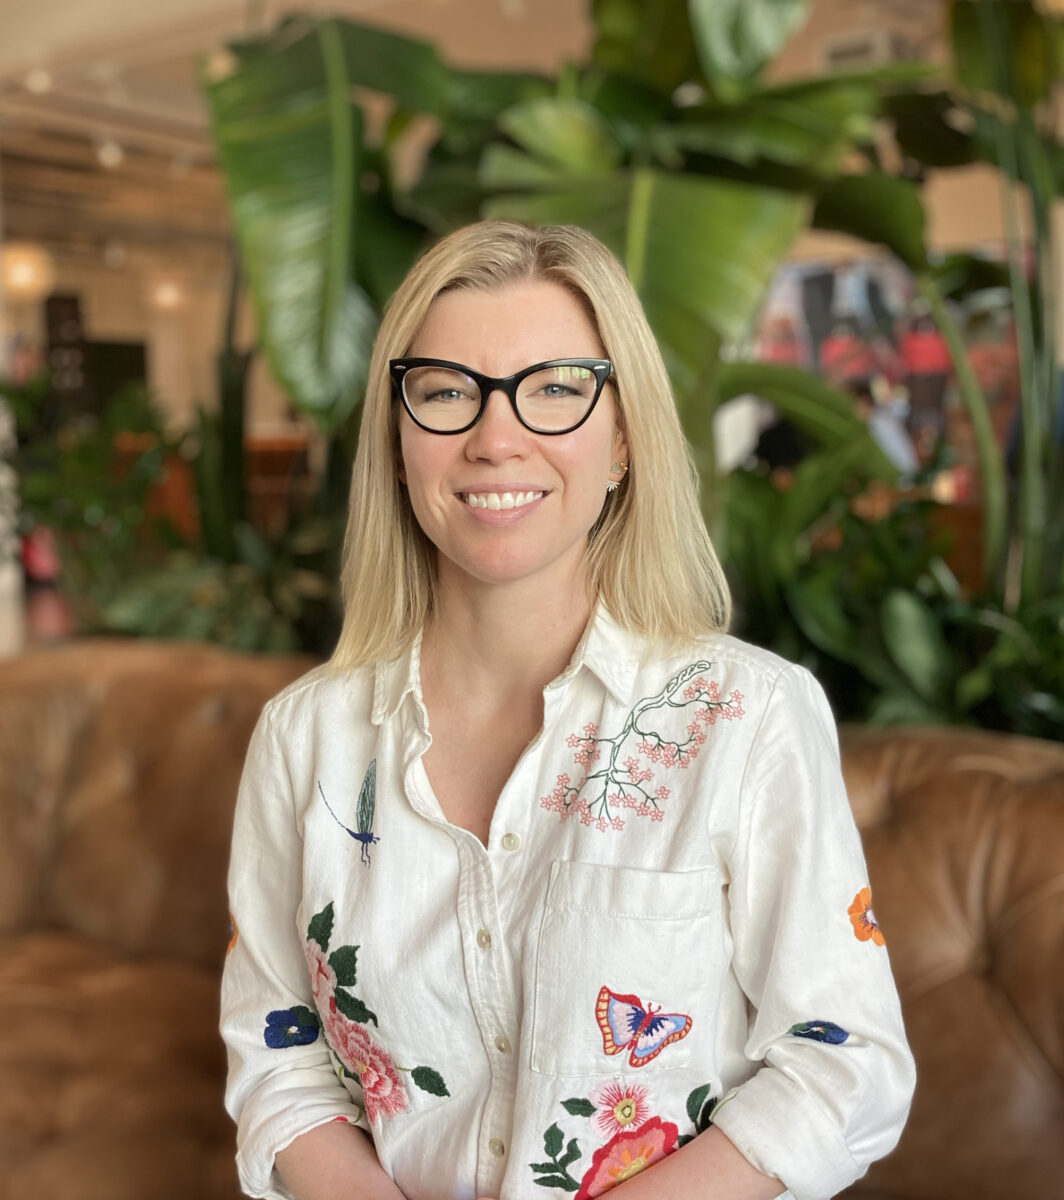 Wunderman Thompson has welcomed a new creative director, Chloe Grindle, previously a Global Creative Director at Ogilvy working across Dove and Hellmann's.